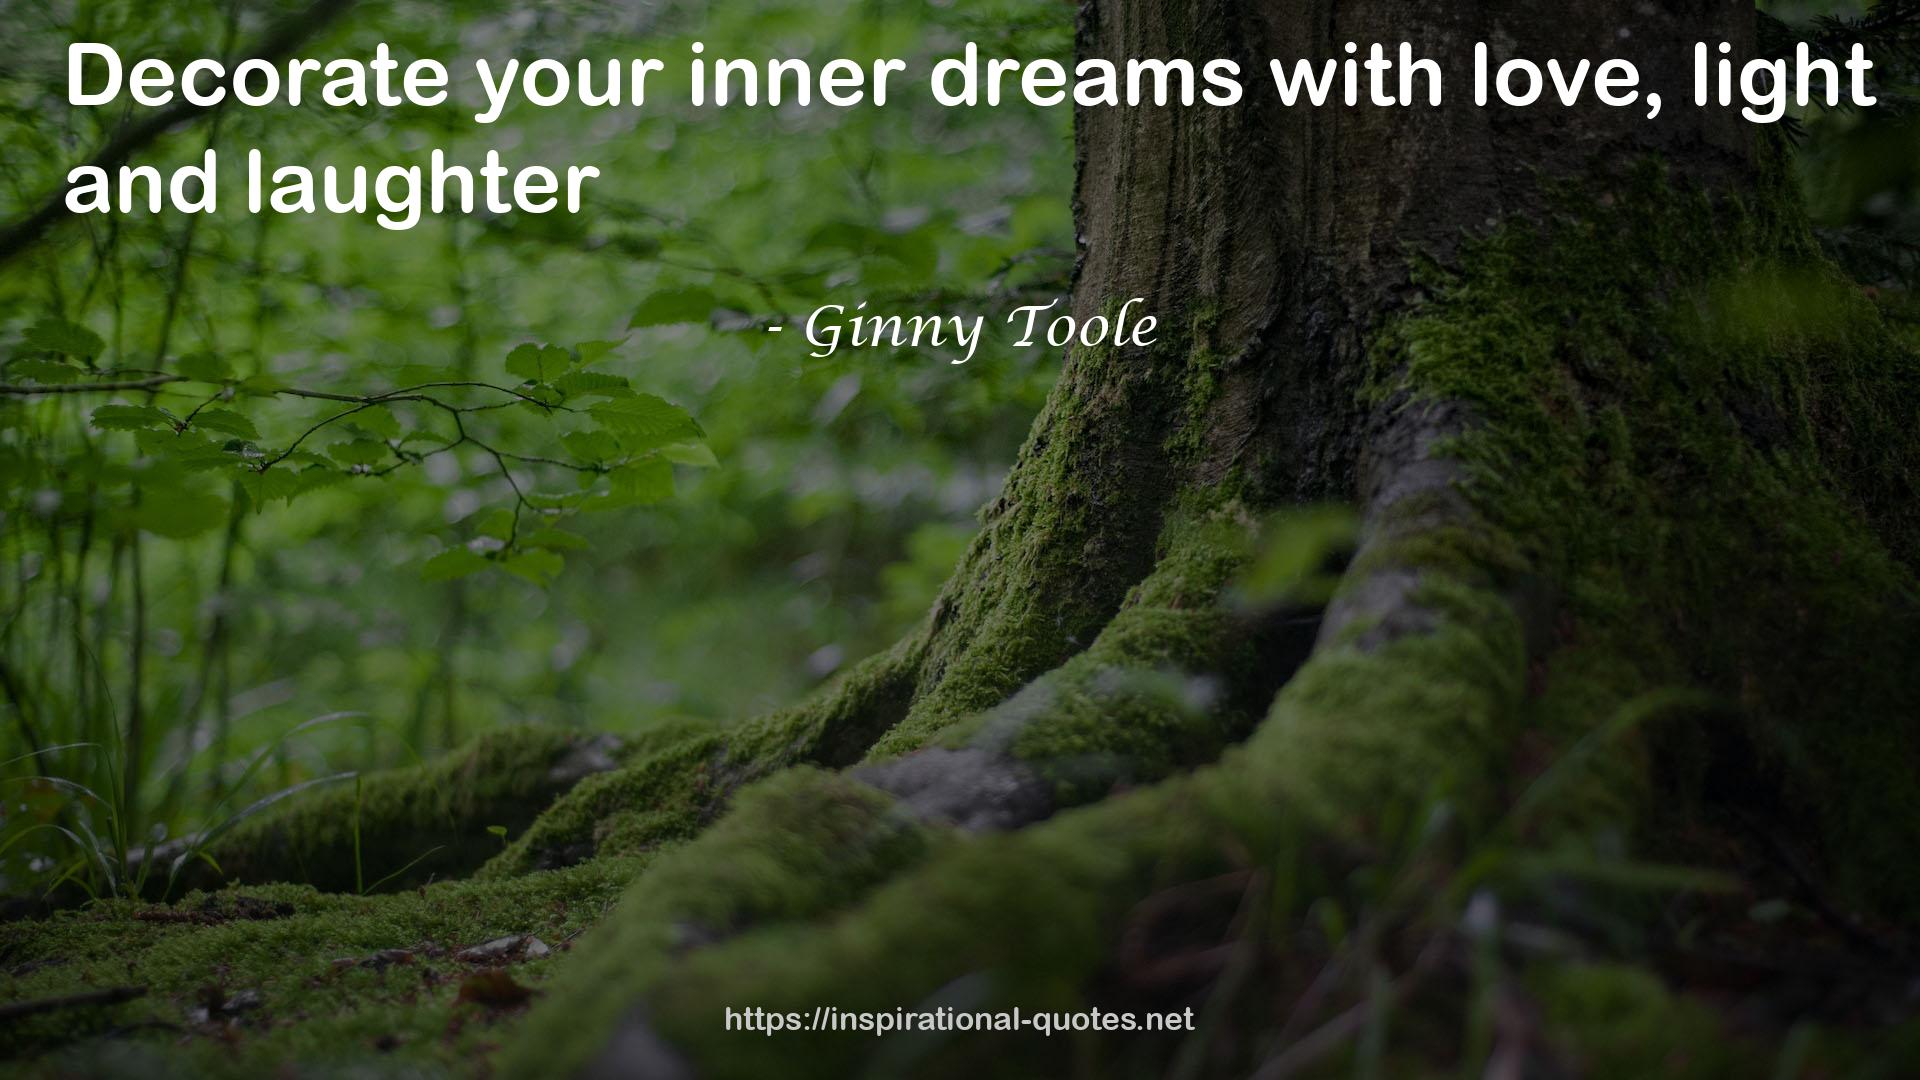 Ginny Toole QUOTES